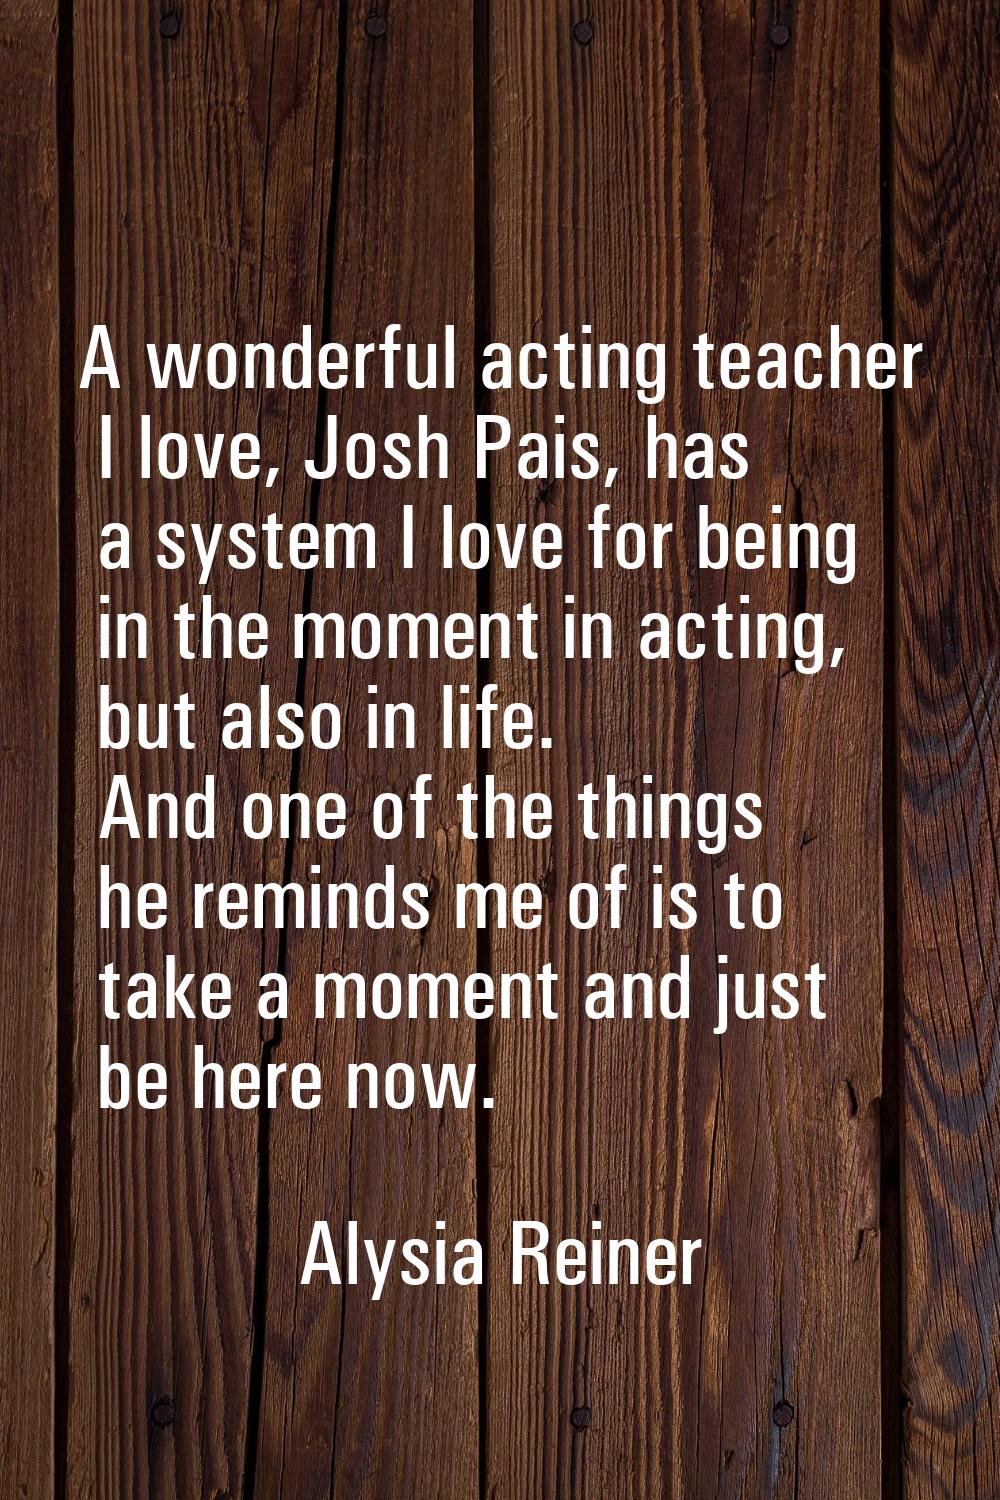 A wonderful acting teacher I love, Josh Pais, has a system I love for being in the moment in acting